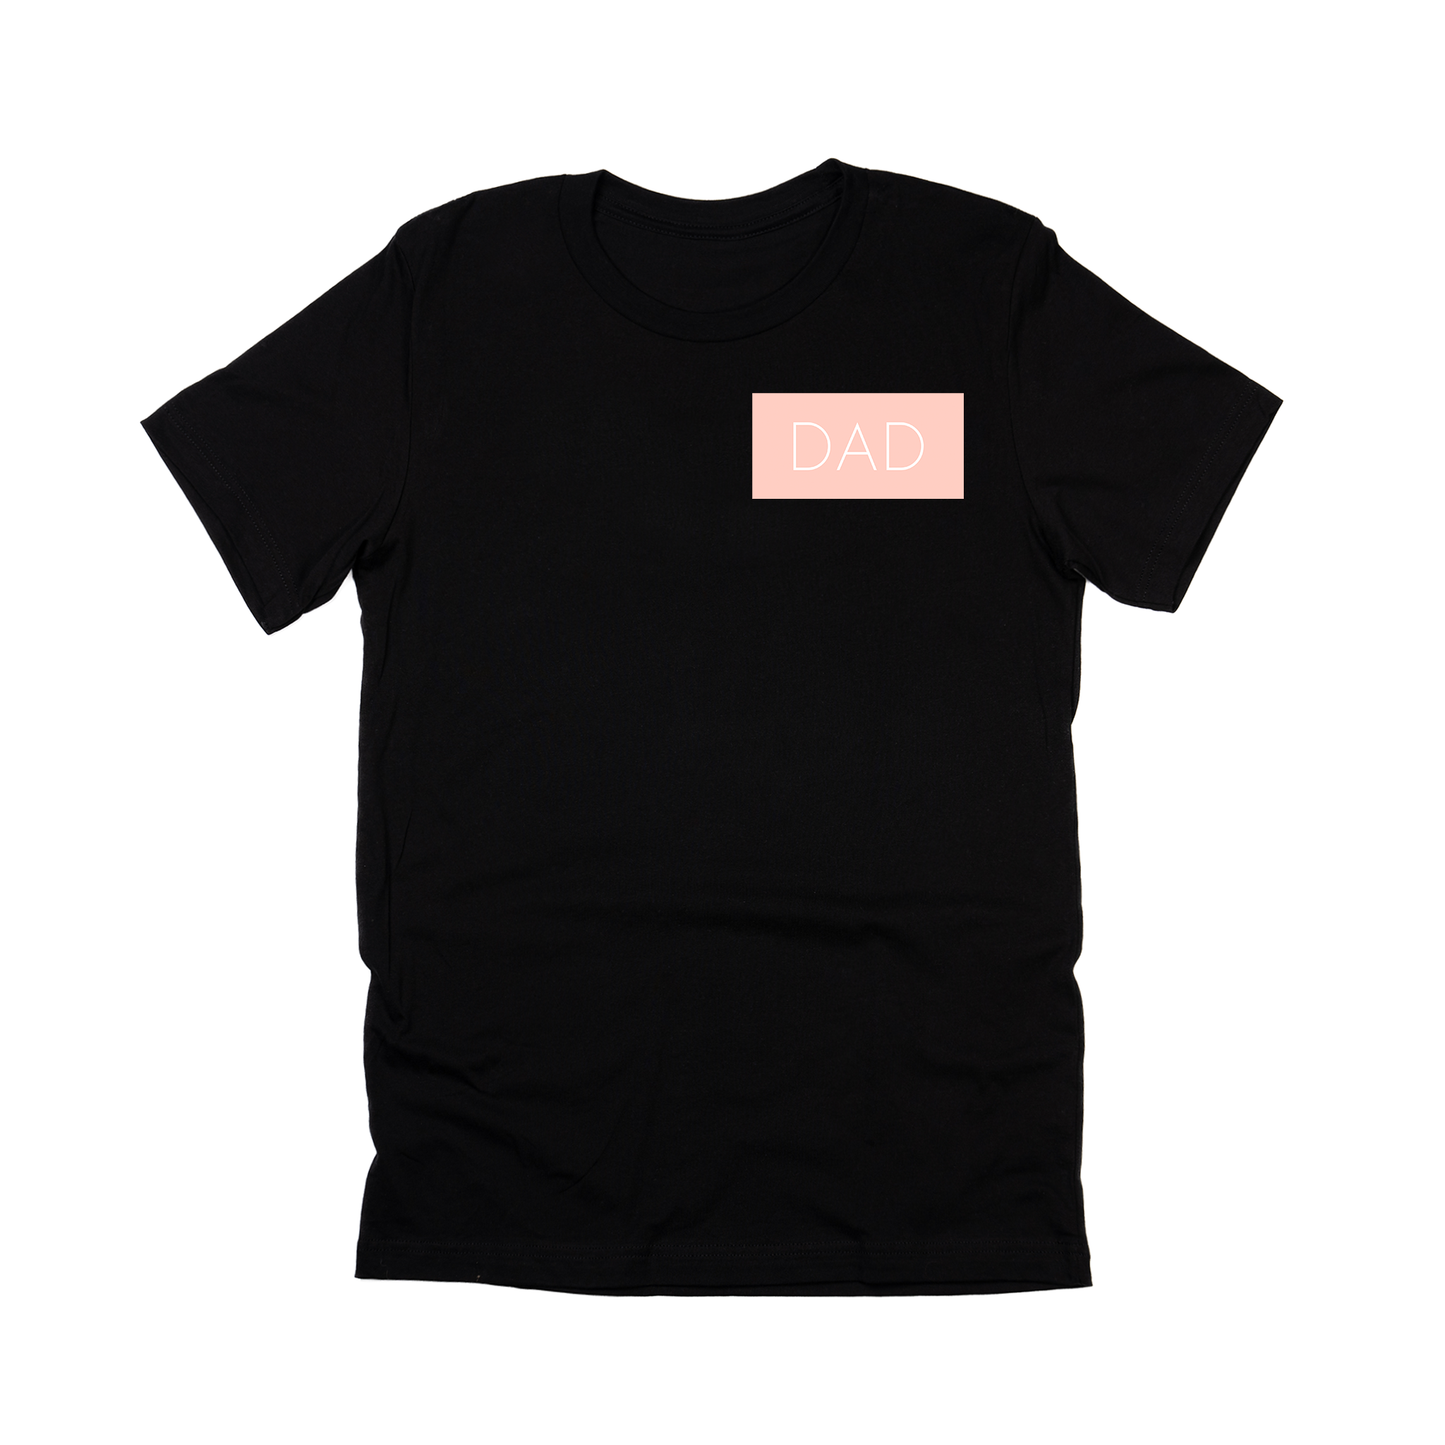 Dad (Boxed Collection, Pocket, Ballerina Pink Box/White Text) - Tee (Black)